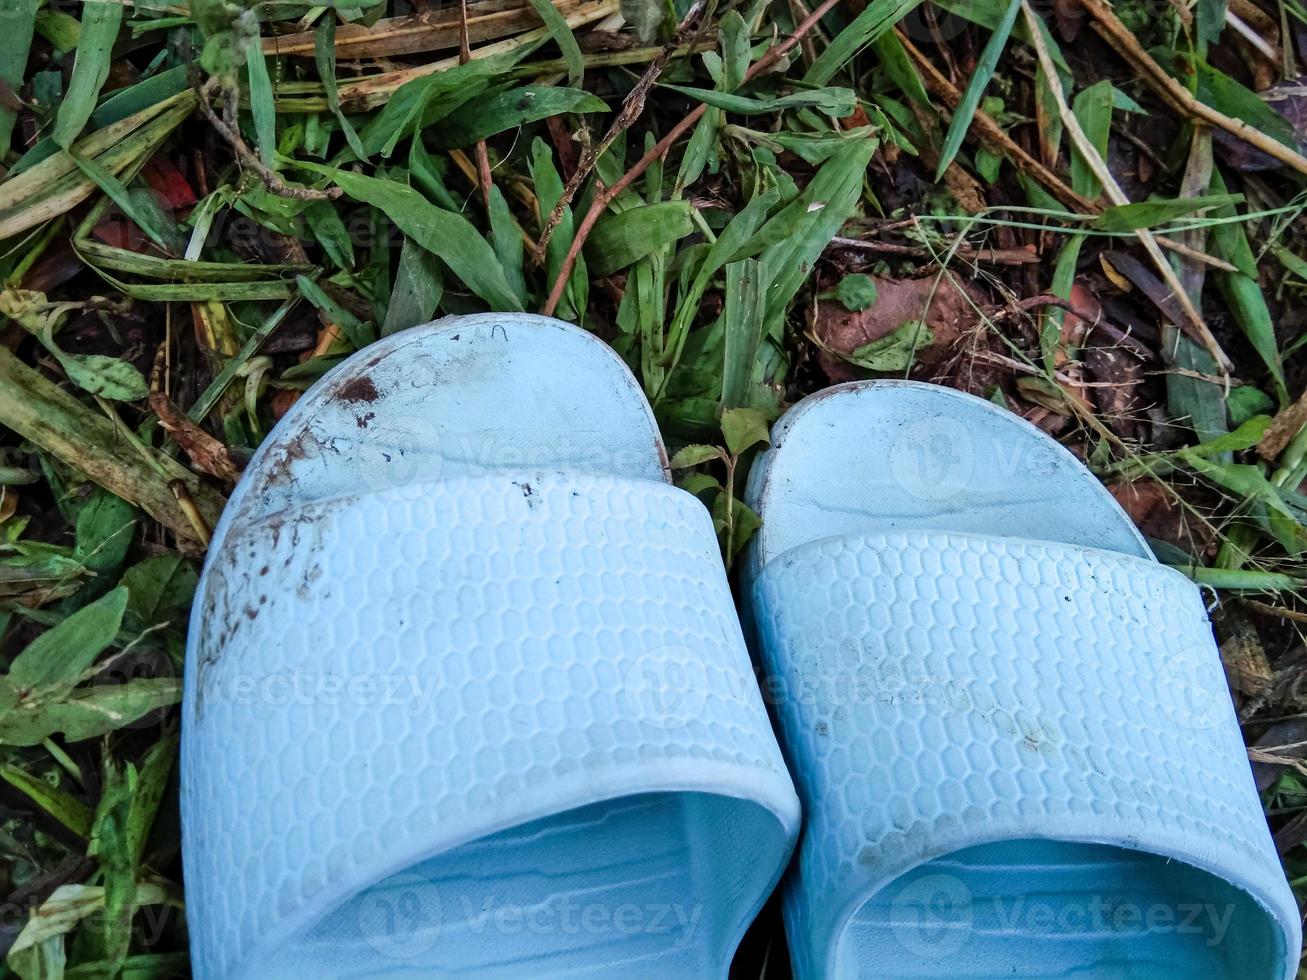 light blue rubber sandals exposed to mud on the green grass photo